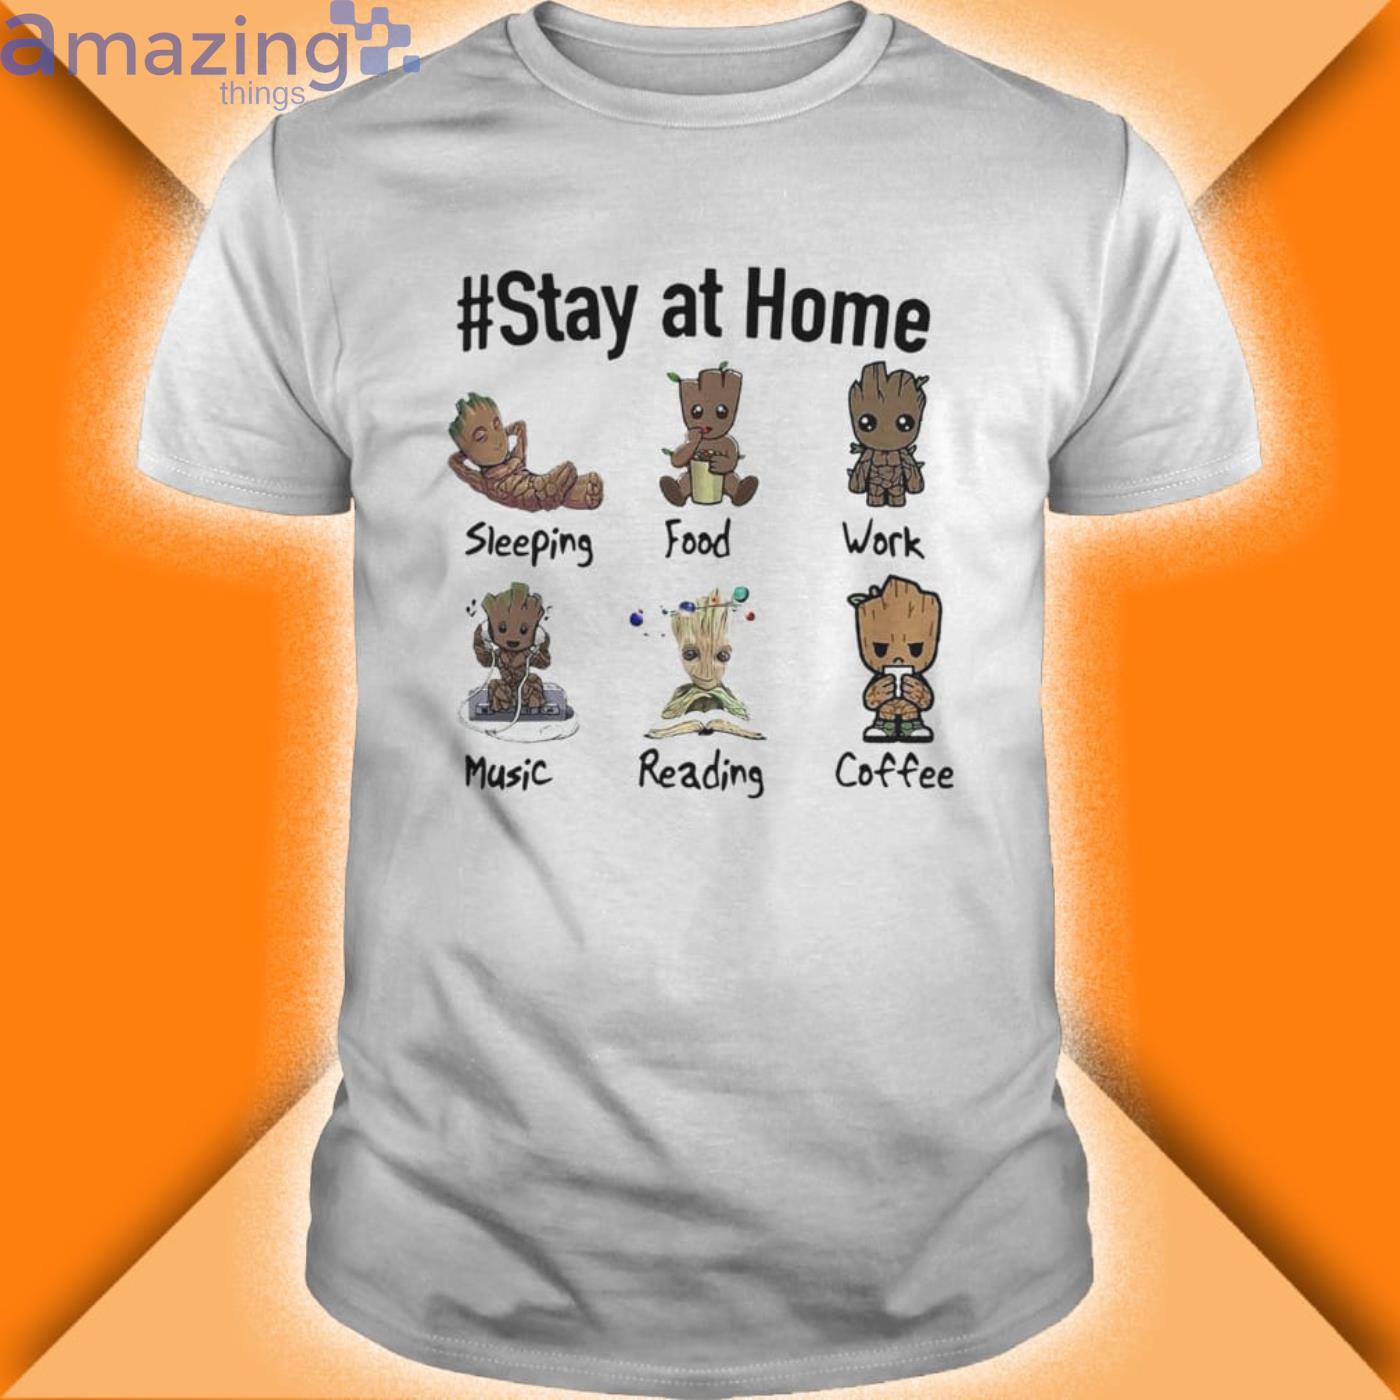 Baby Groot Stay At Home Shirt Product Photo 1